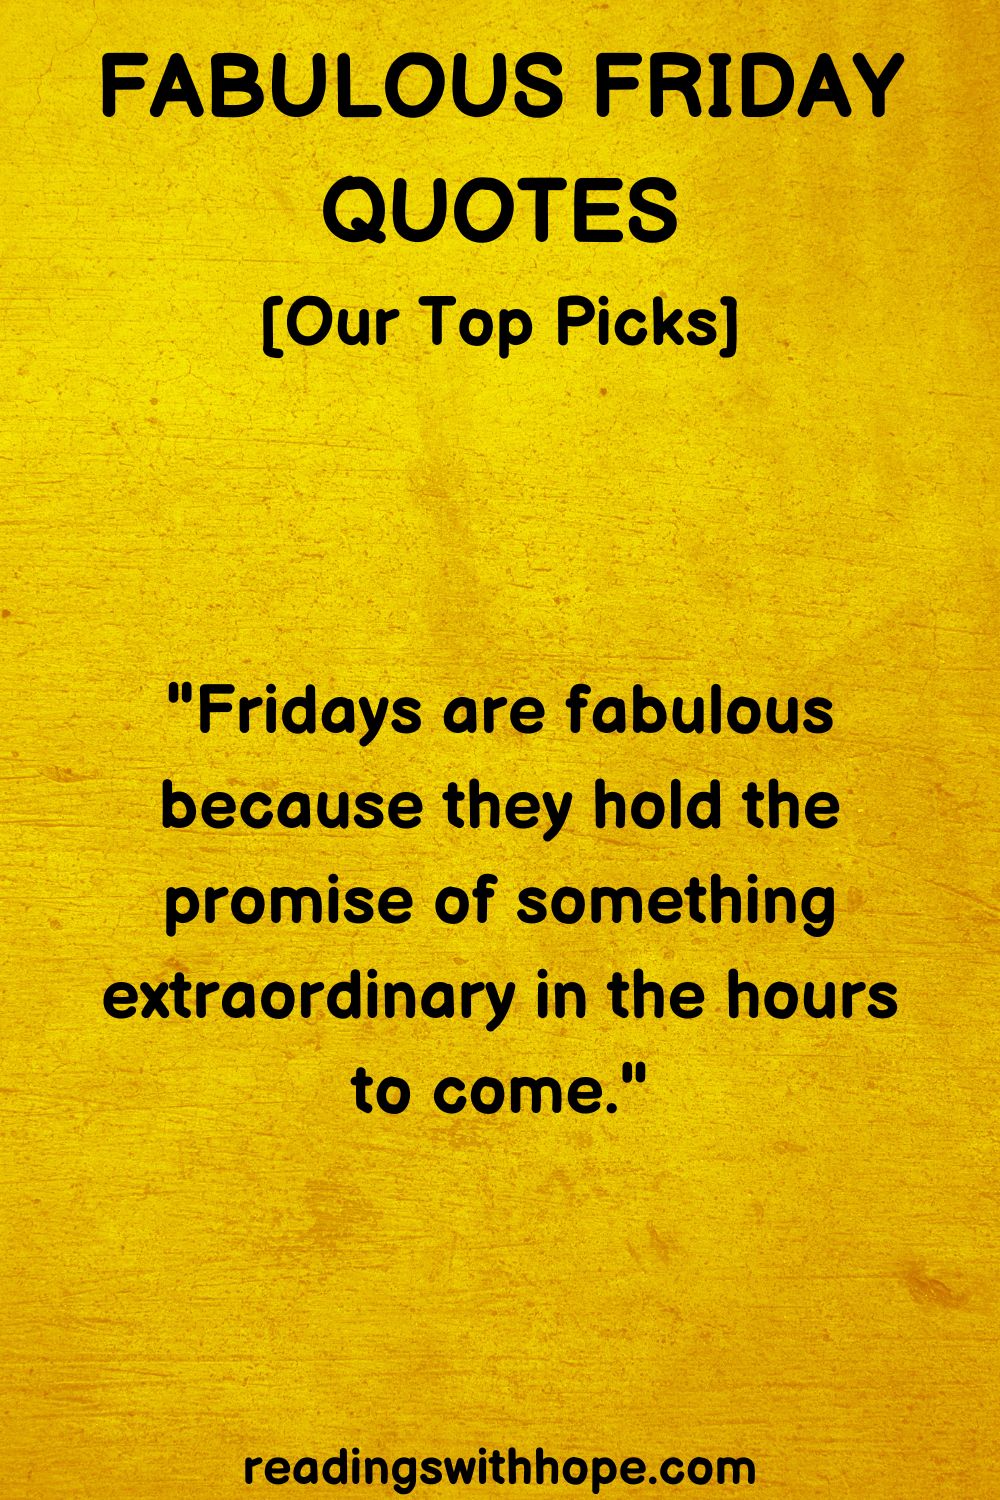 fabulous friday quotes